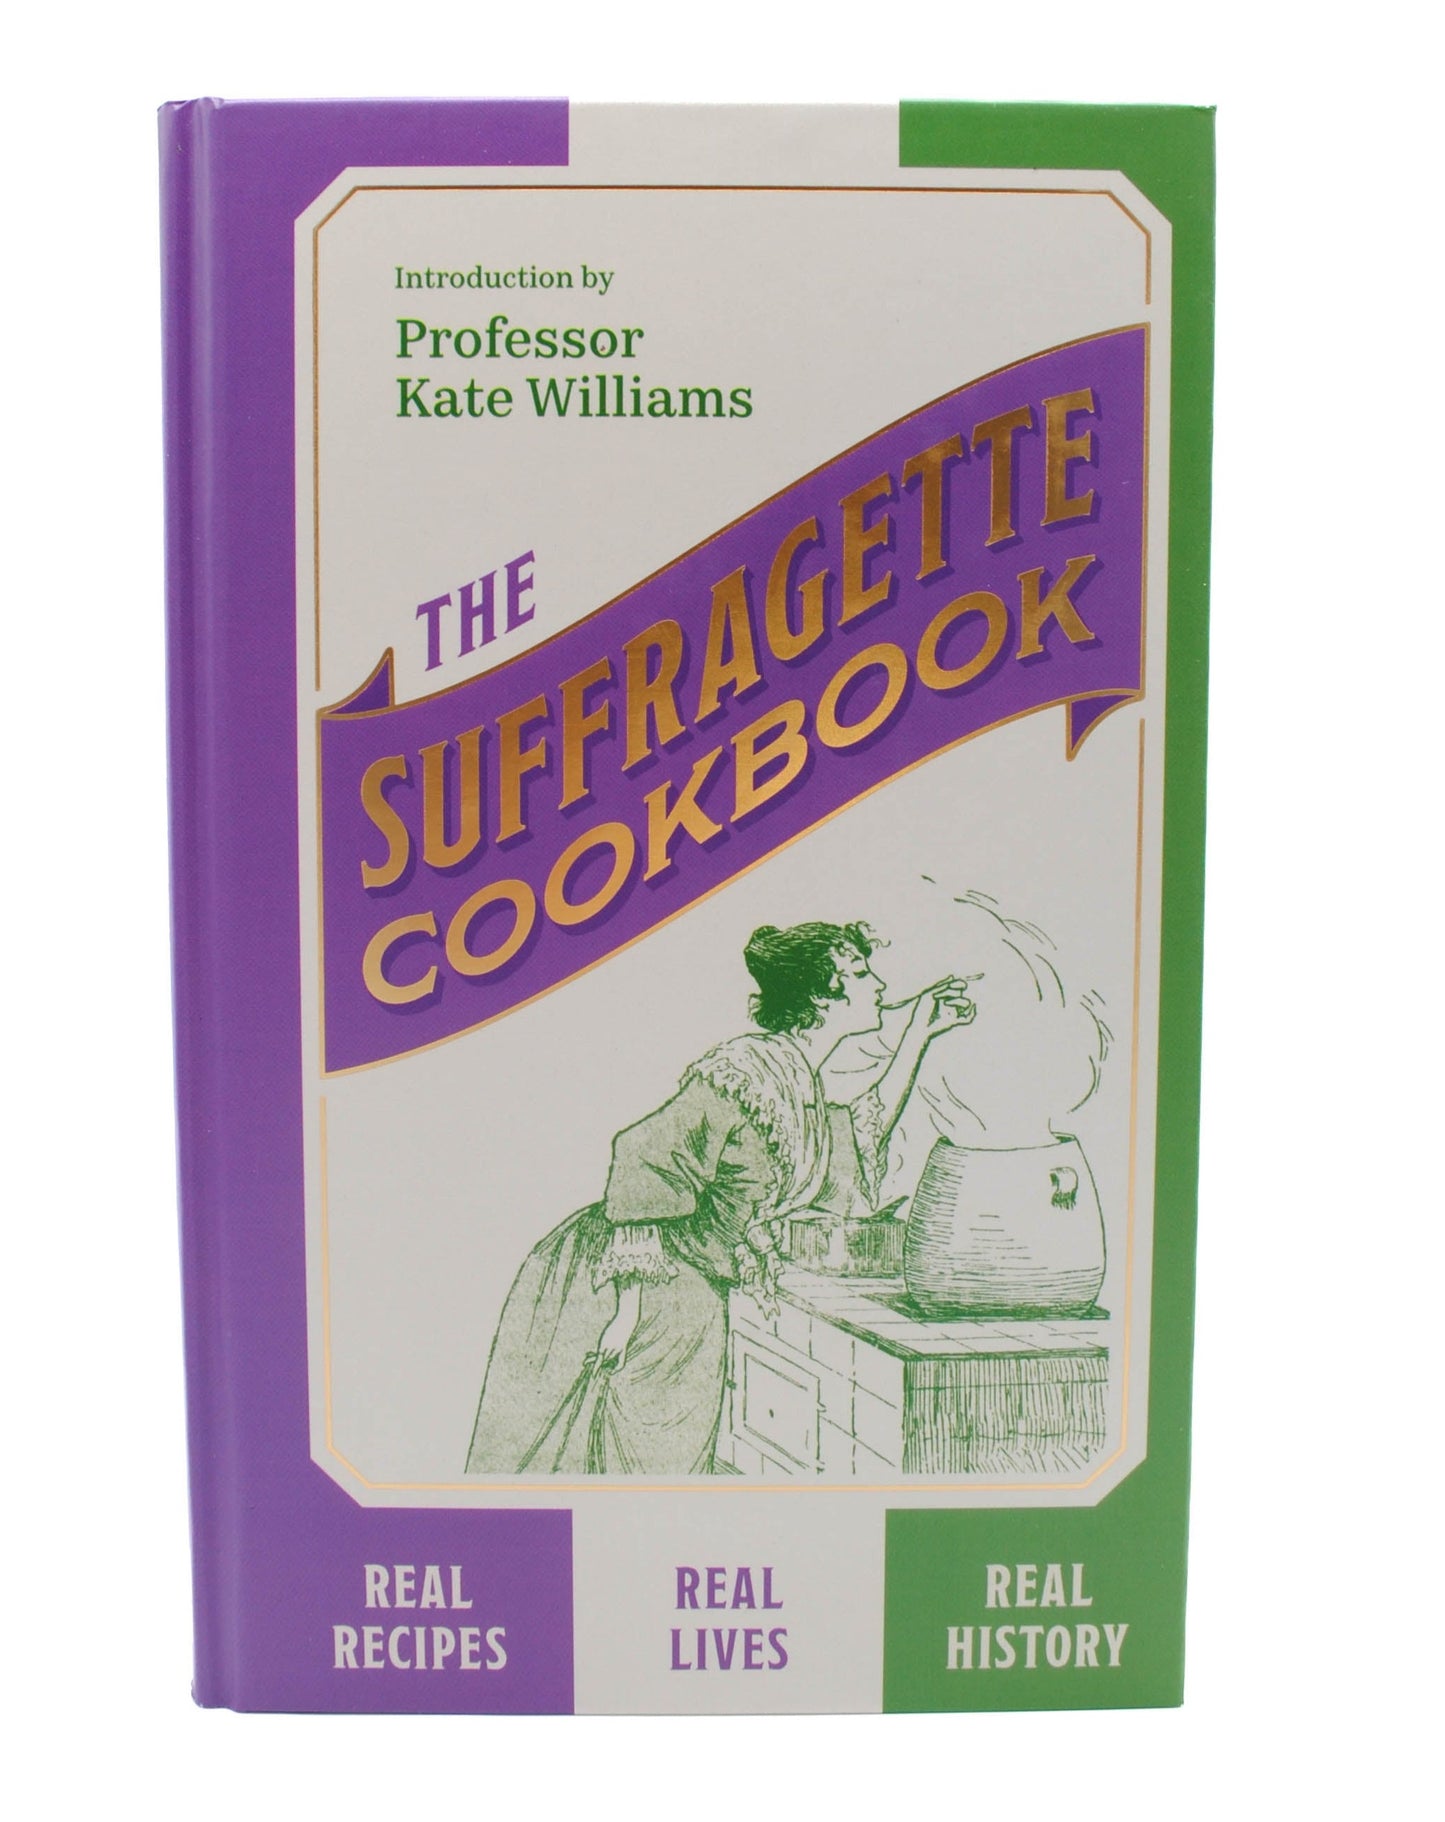 The Suffragette Cookbook: Real Recipes, Real Lives, Real History